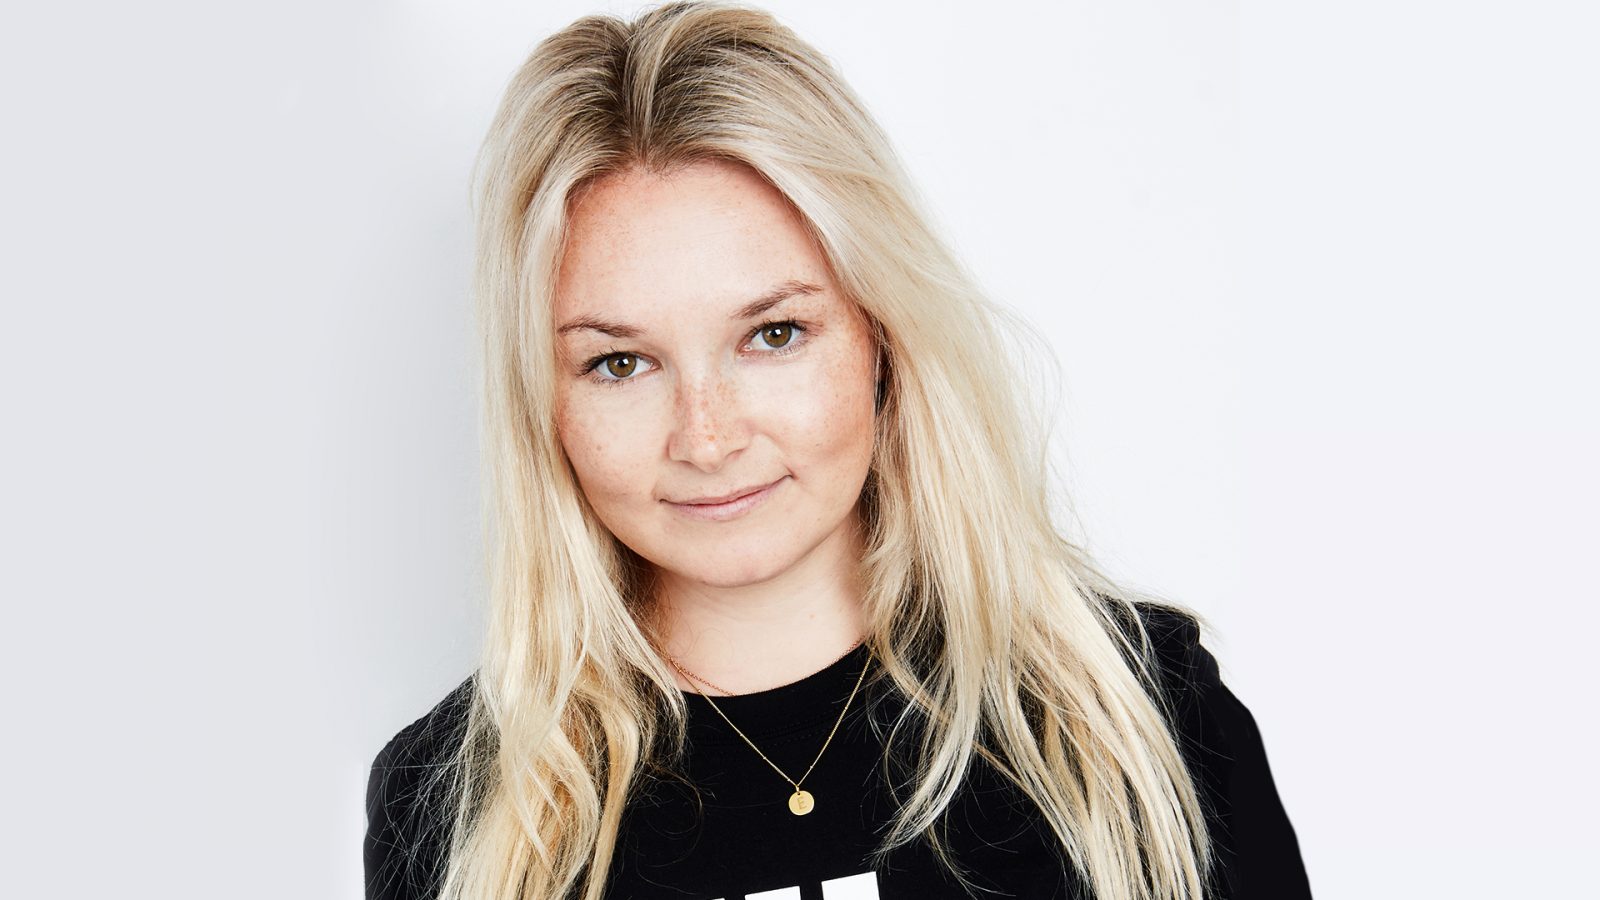 Interview with Emma Watkinson, Entrepreneur, CEO and Co-Founder of Silkfred